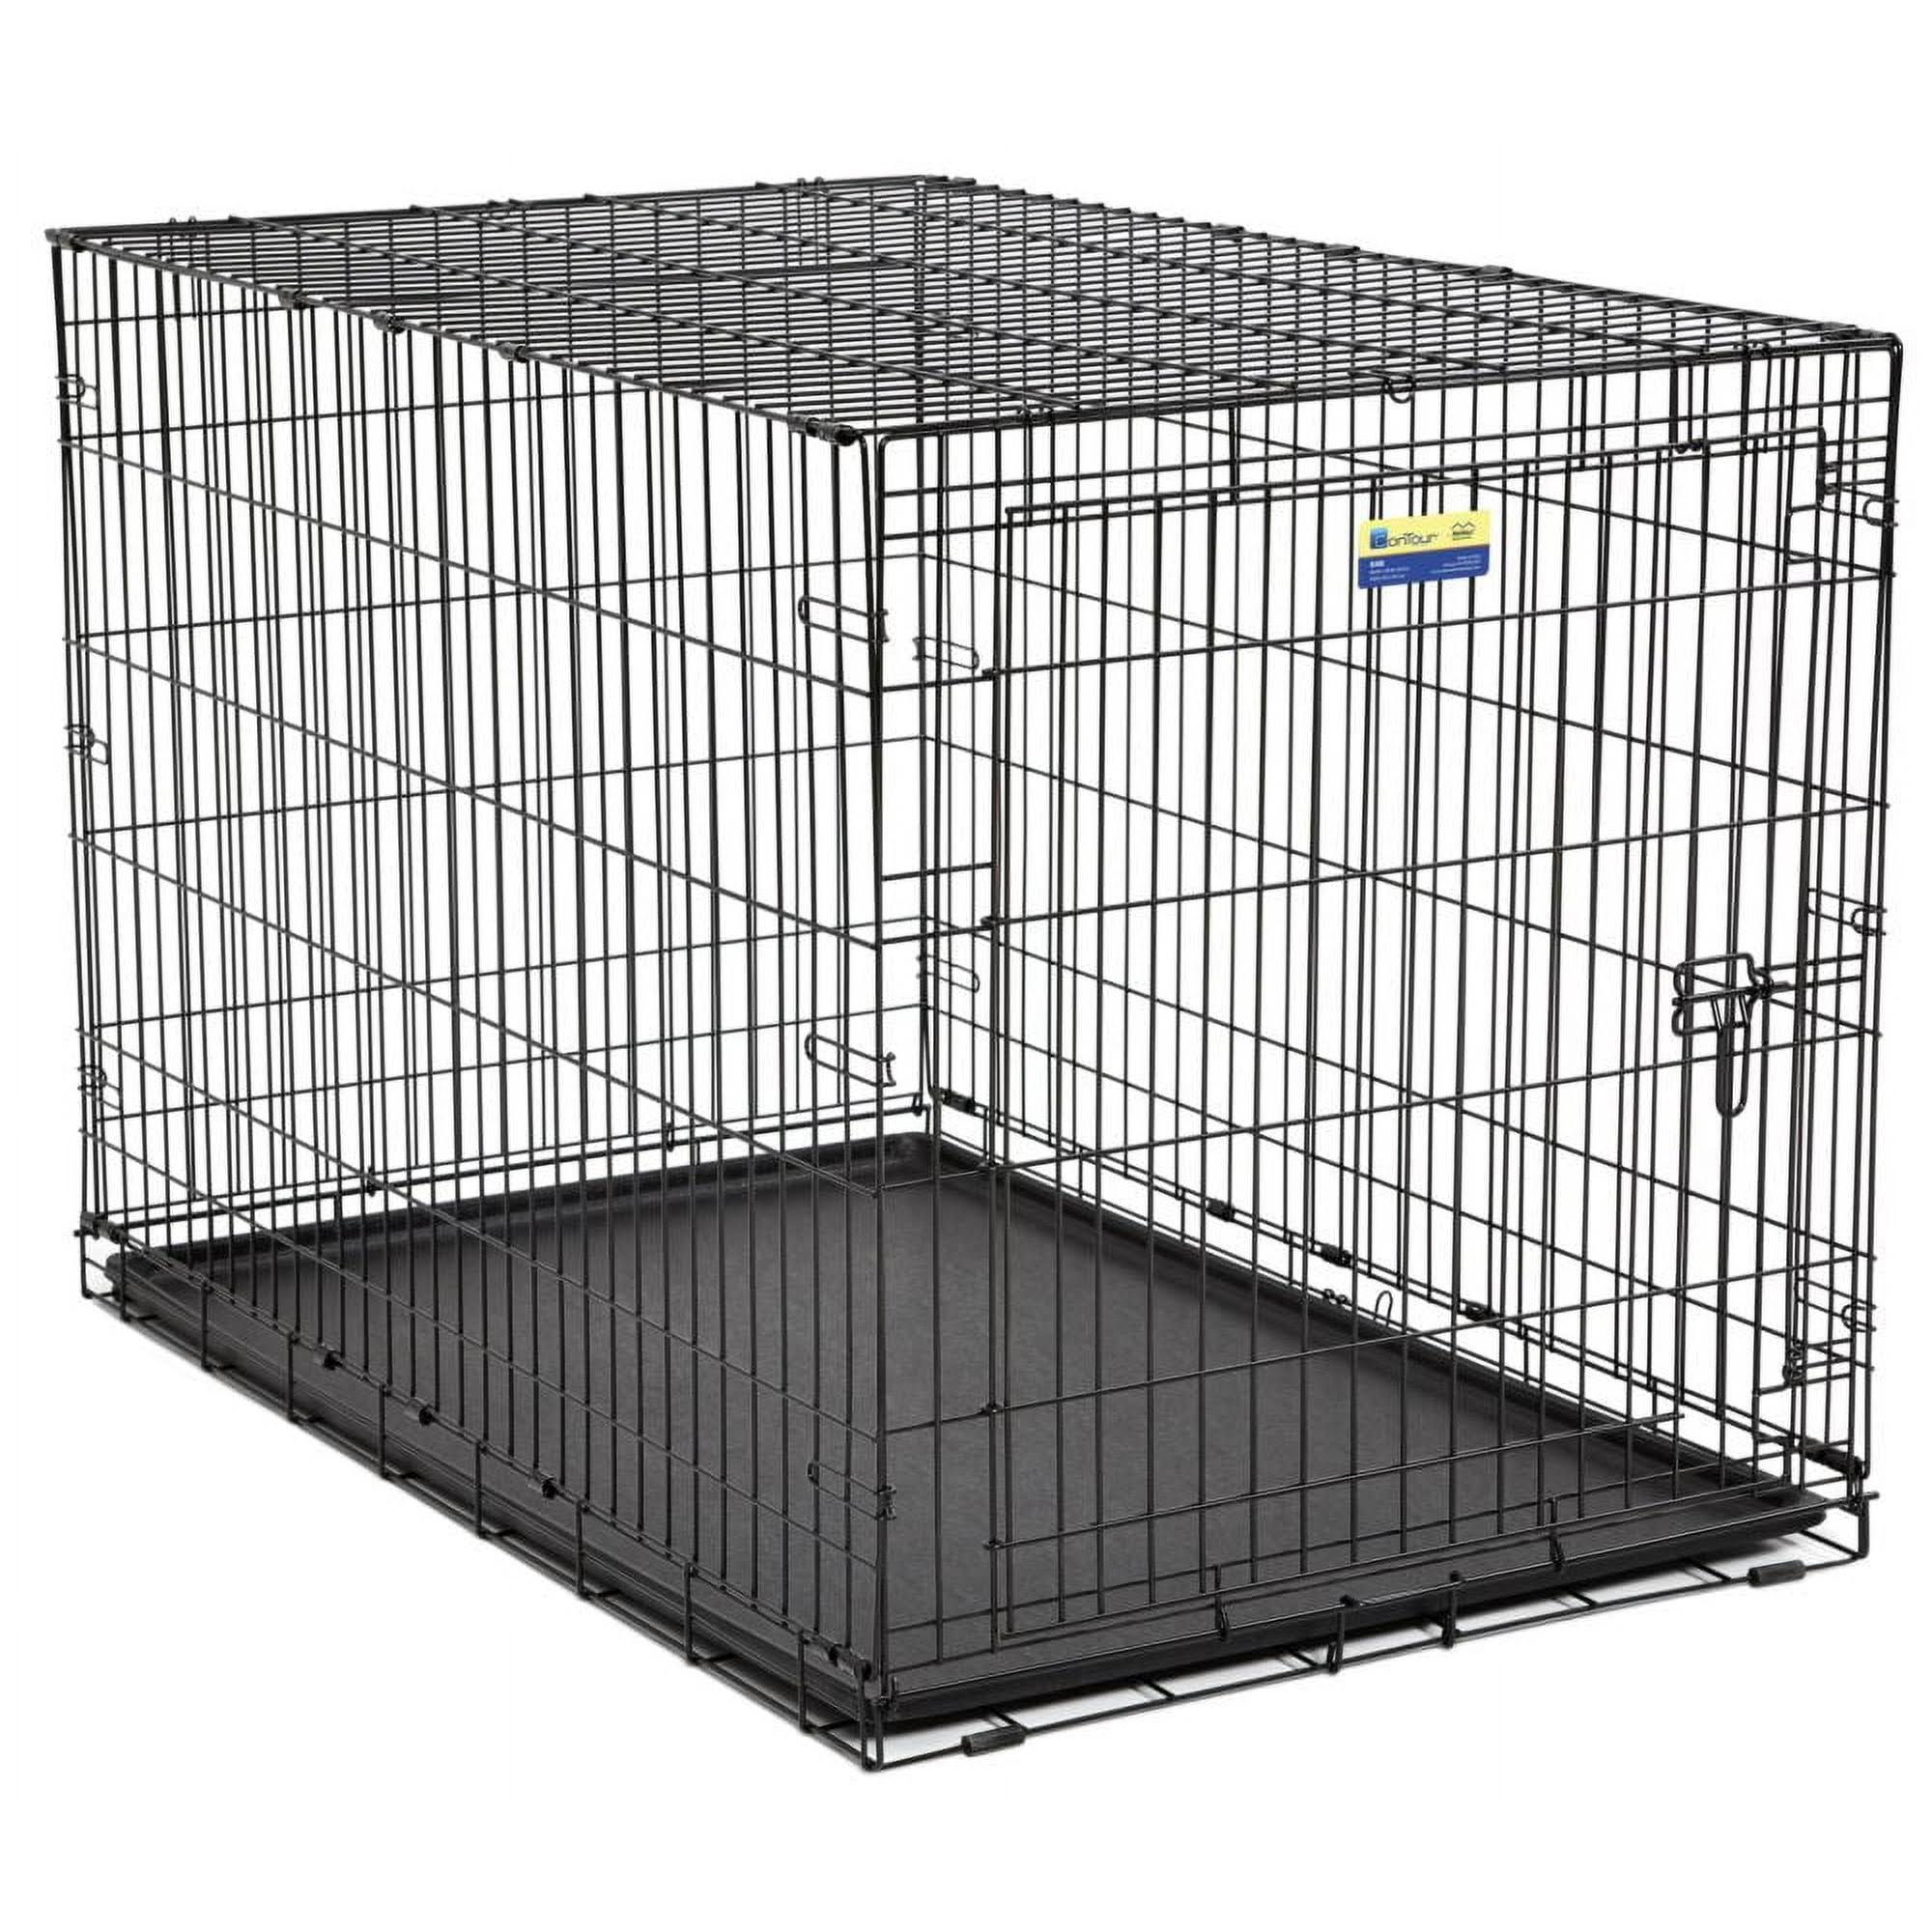 Contour Dog Crate 48 inch